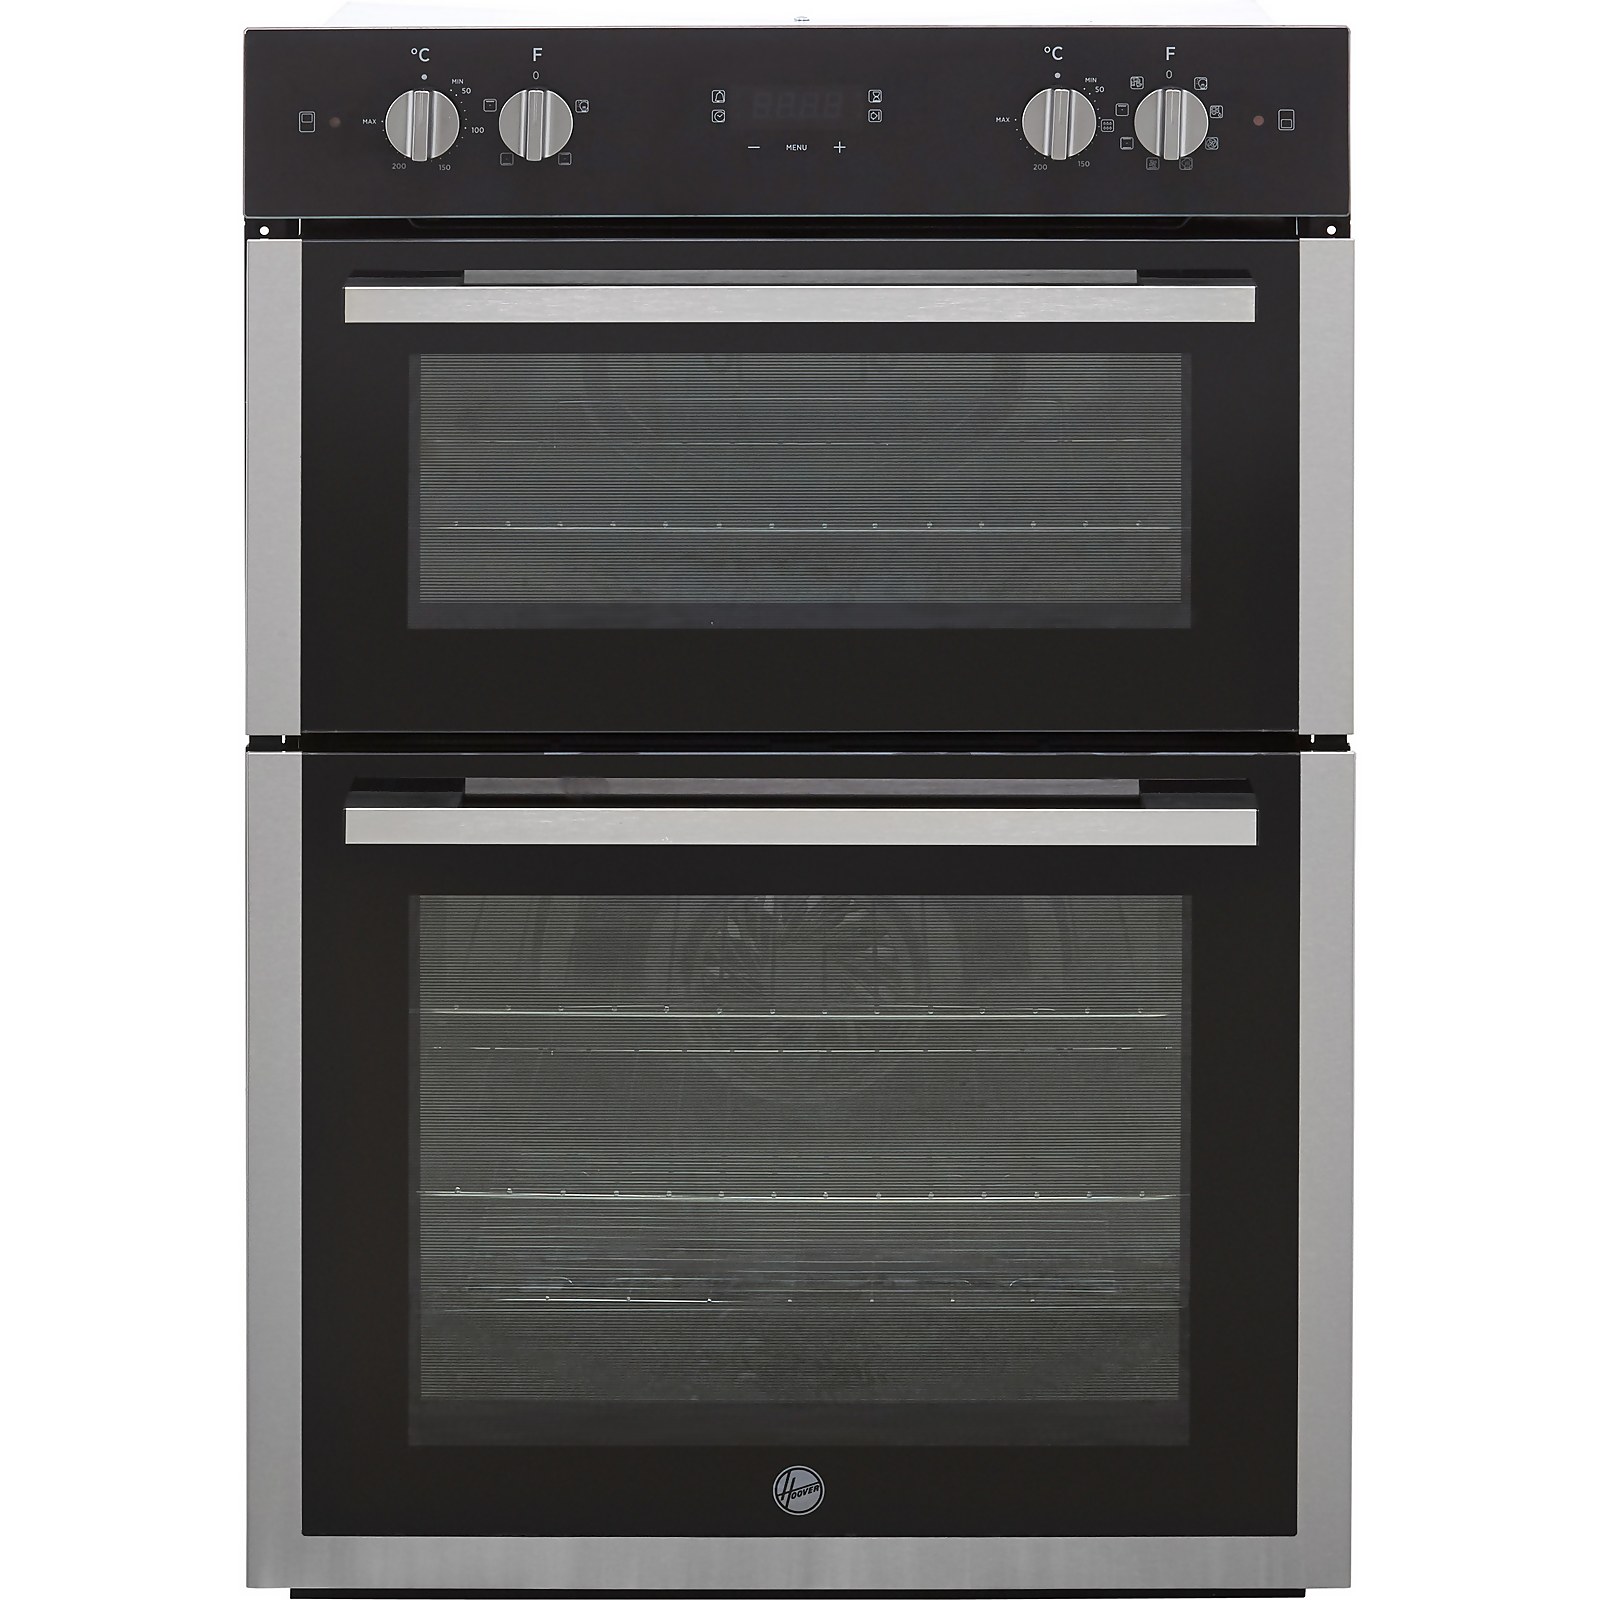 Photo of Hoover H-oven 300 Ho9dc3ub308bi Built In Electric Double Oven - Black / Stainless Steel